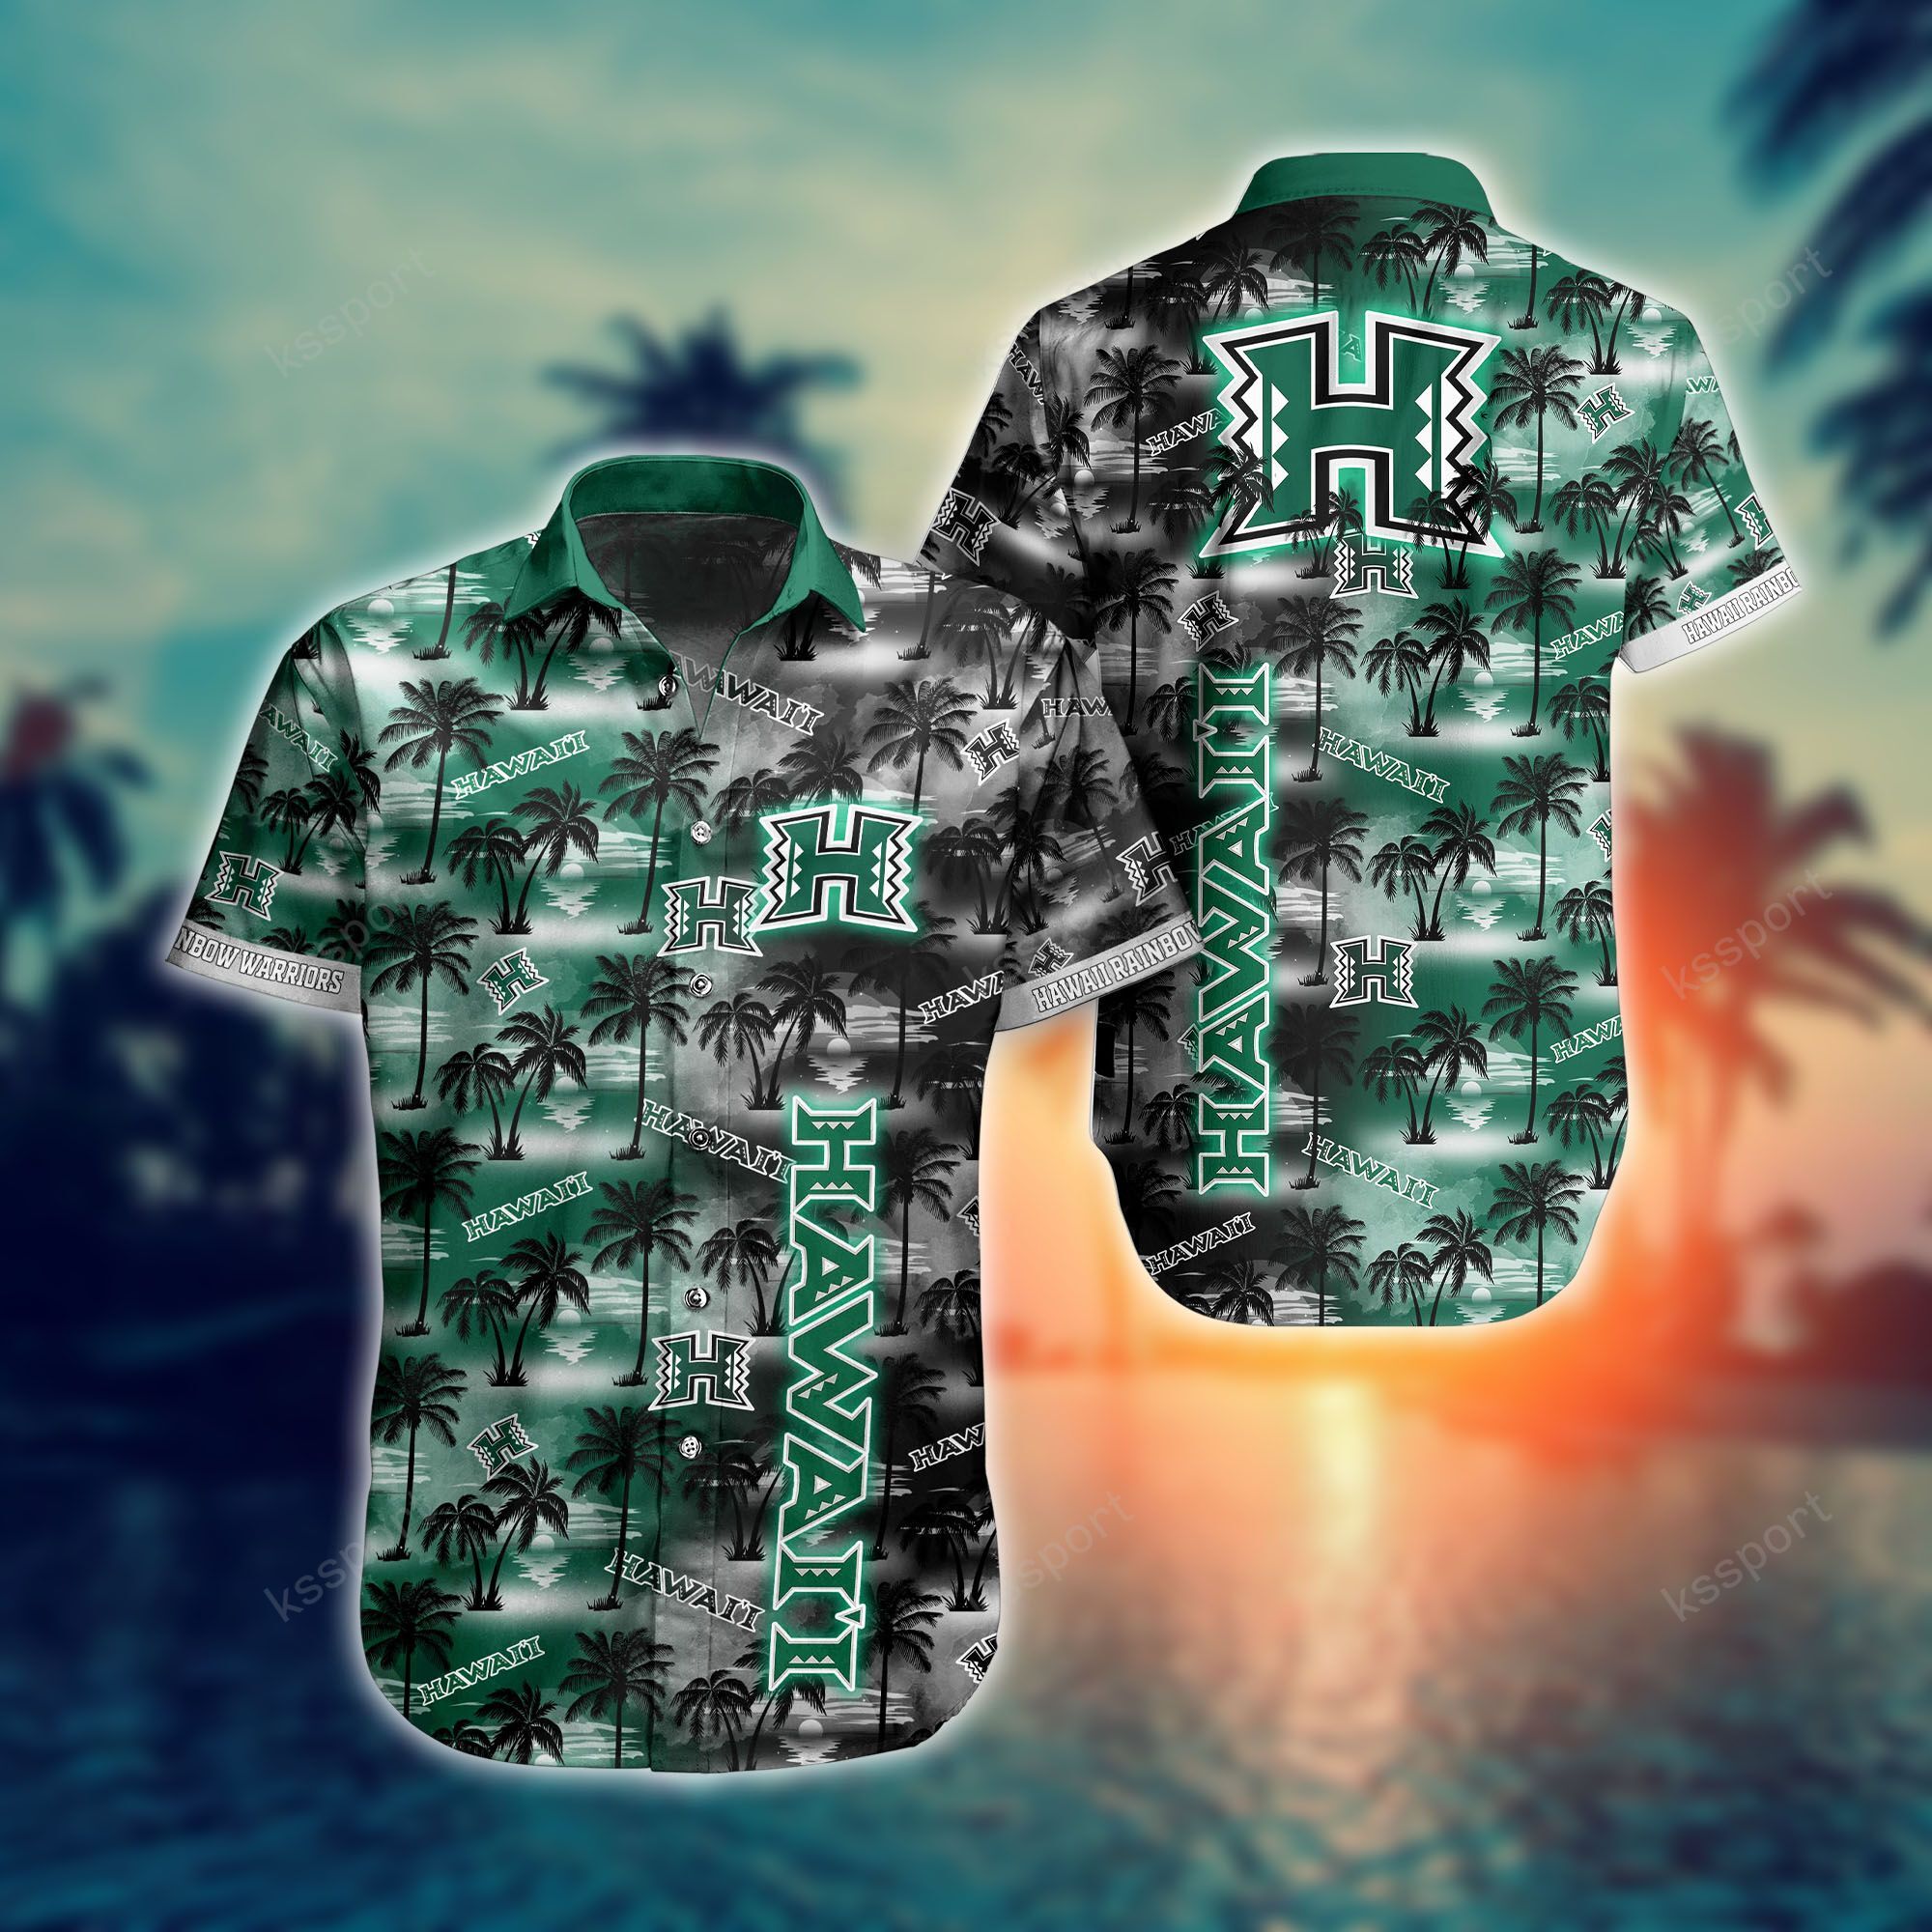 Treat yourself to a cool Hawaiian set today! 24